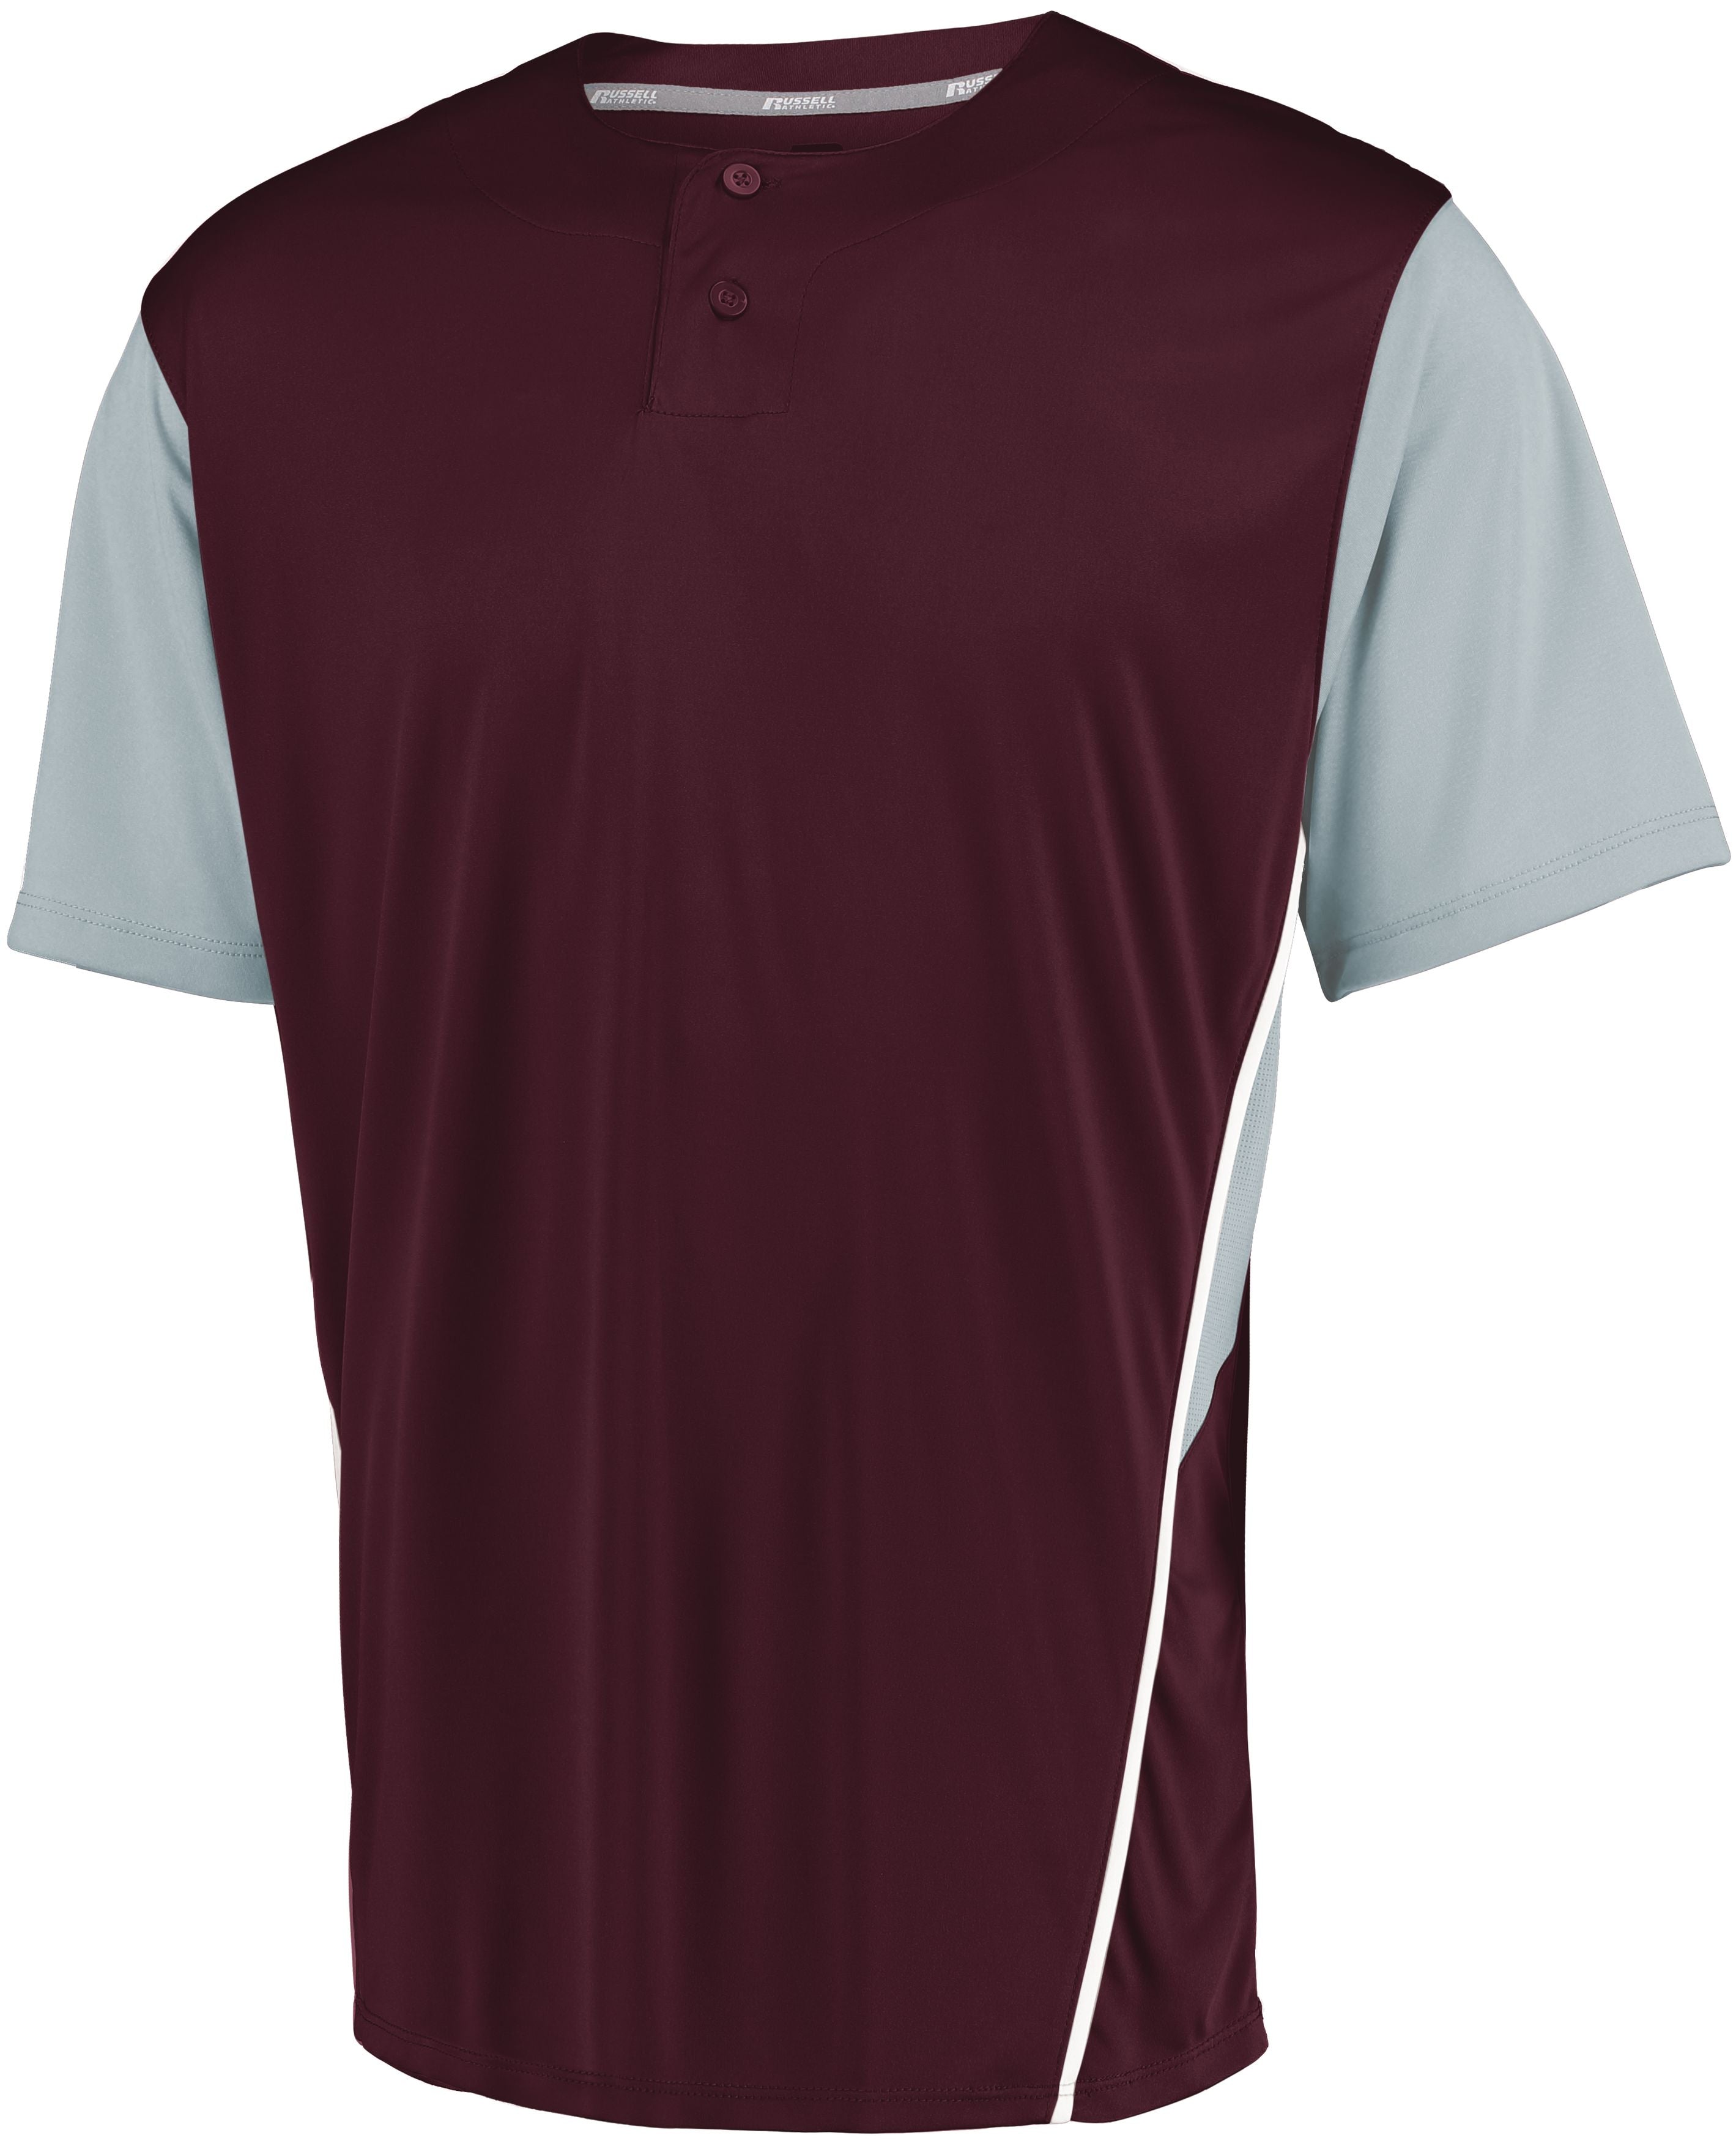 Russell Athletic Youth Two-Button Placket Jersey in Maroon/Baseball Grey  -Part of the Youth, Youth-Jersey, Baseball, Russell-Athletic-Products, Shirts, All-Sports, All-Sports-1 product lines at KanaleyCreations.com